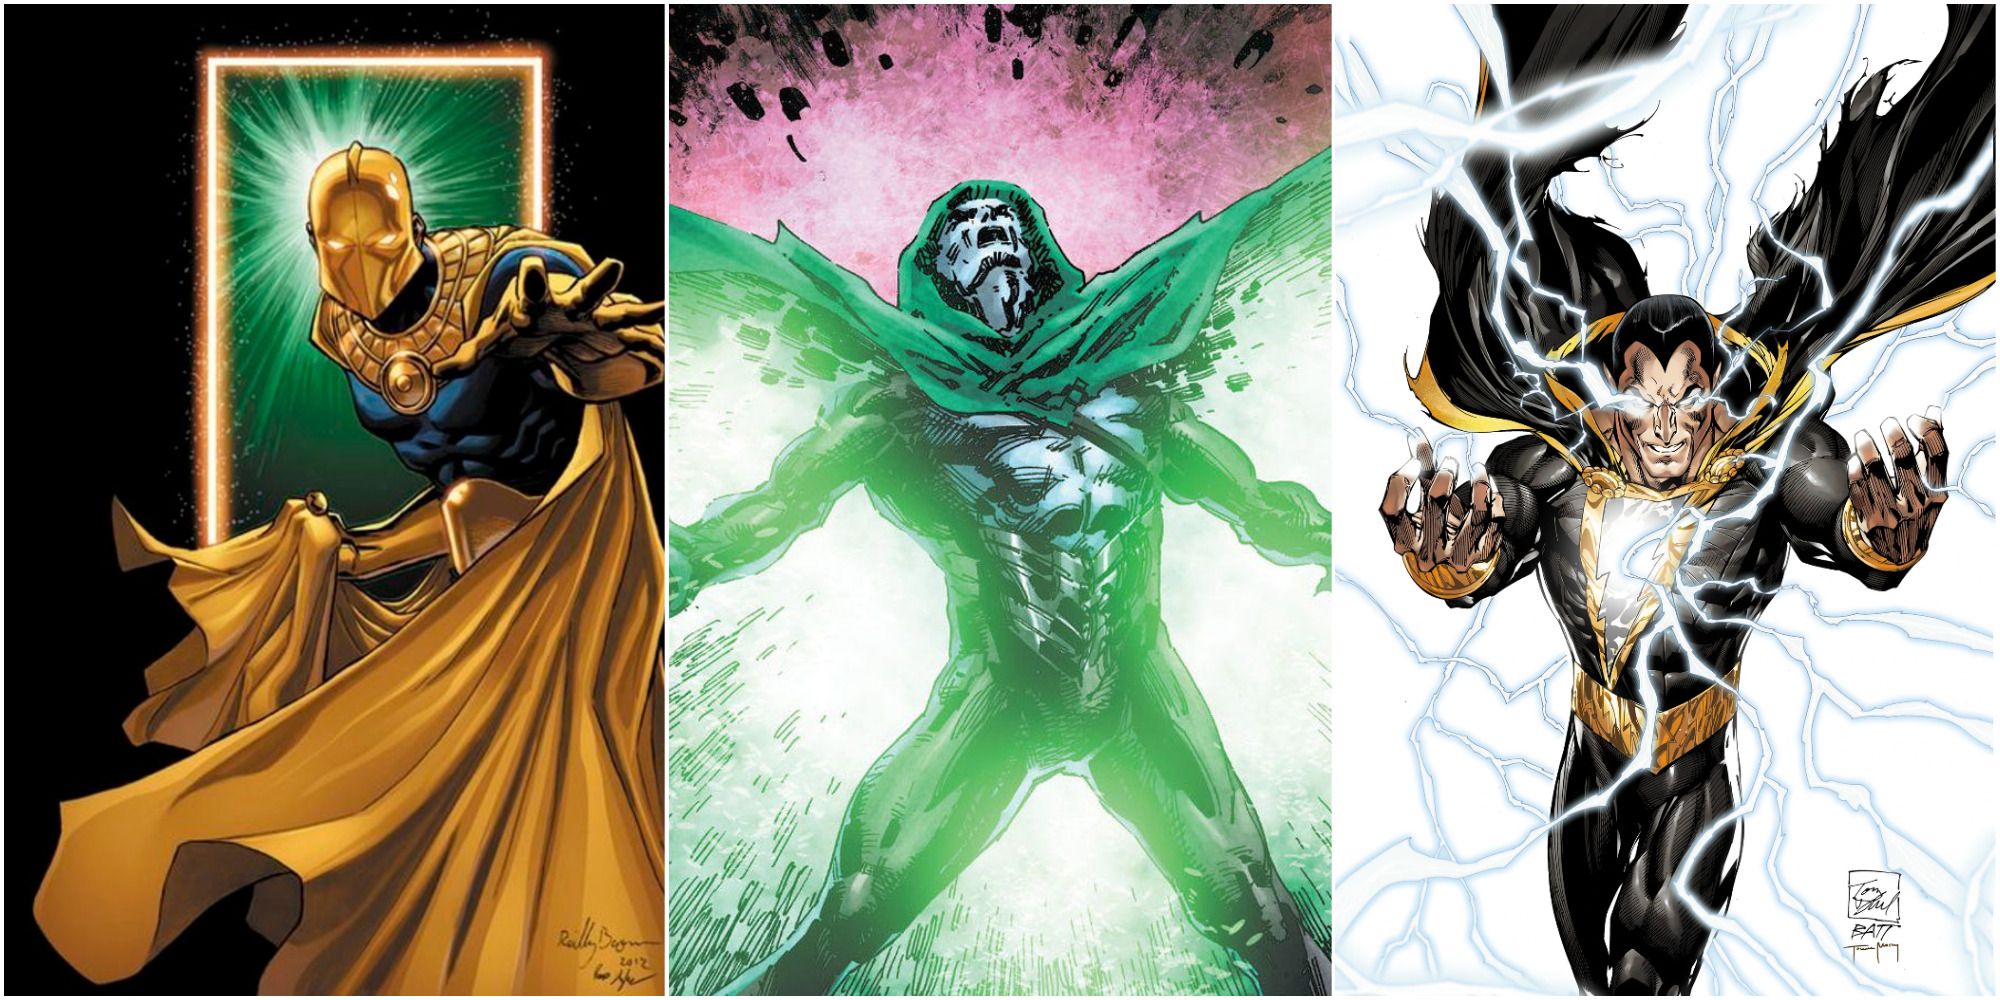 Dr Fate, the Spectre, and Black Adam